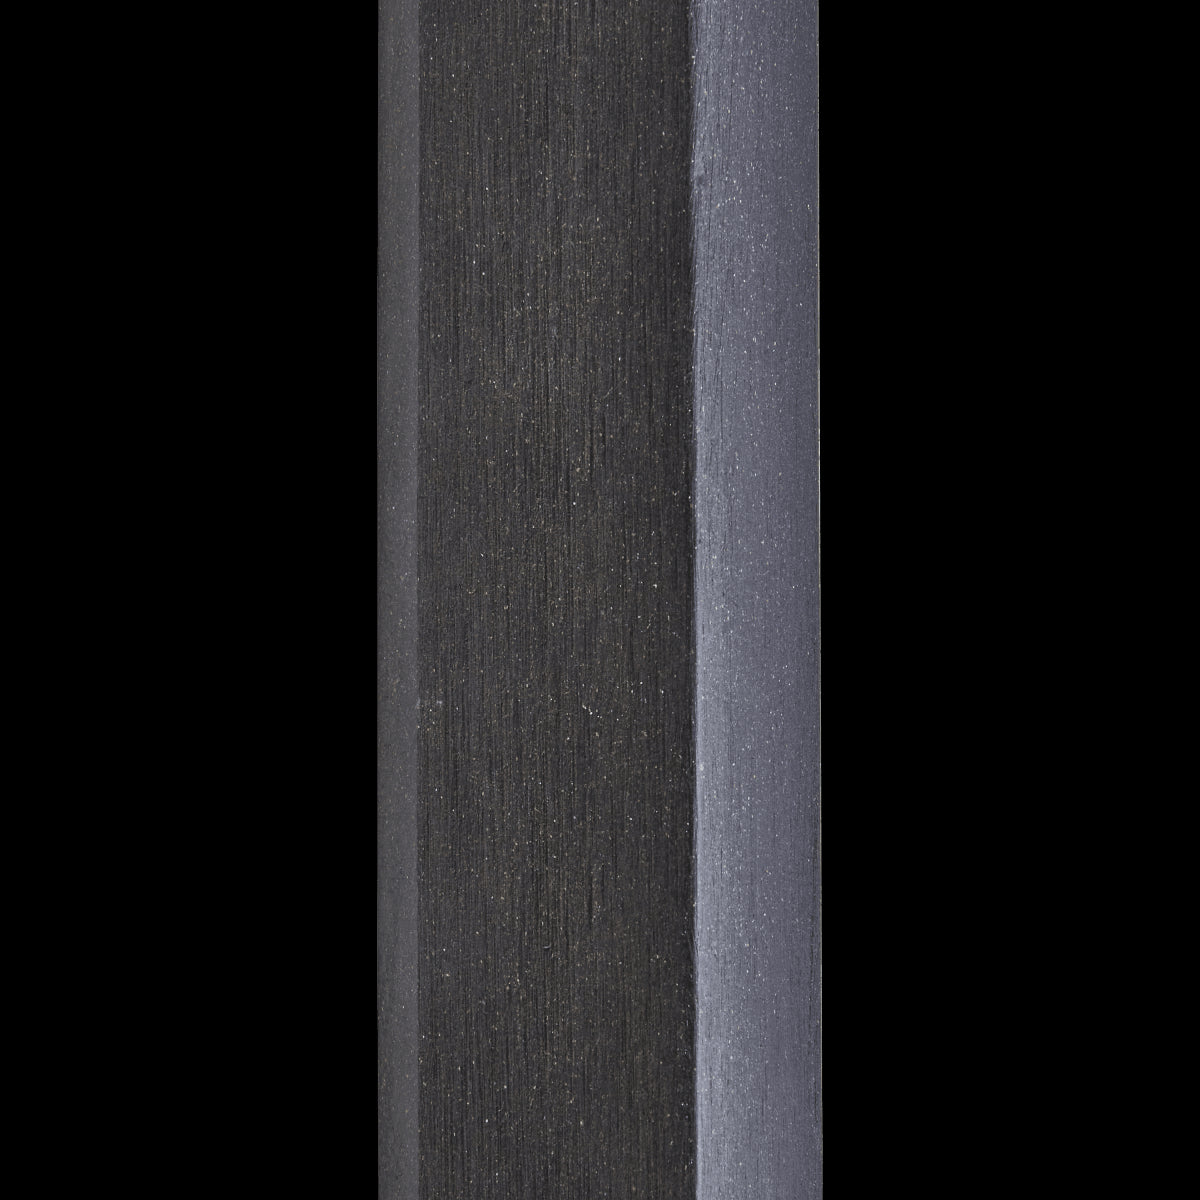 DARK GREY KYOTO NATERIAL COMPOSITE PLANK PROFILE 240X4X5.5CM THICKNESS 6MM